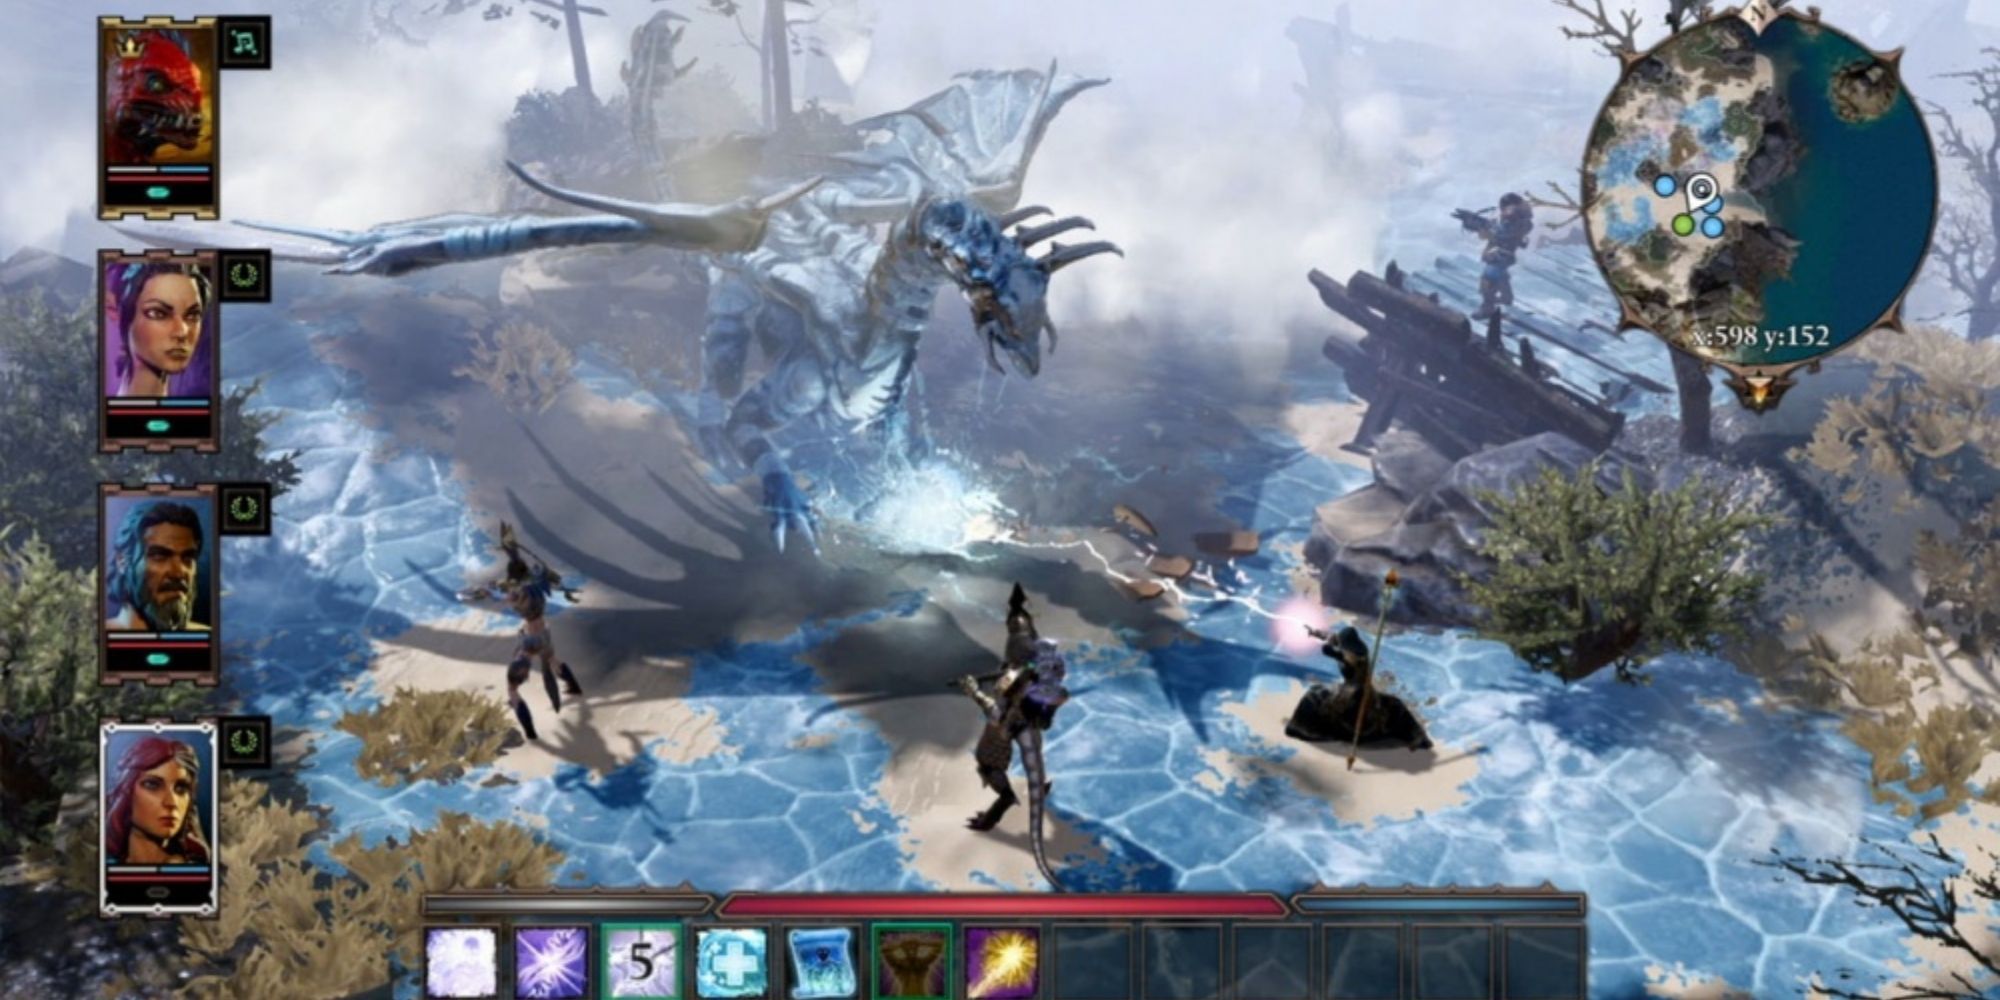 The Protagonists Fighting A Giant Blue Dragon in Divinity Original Sin 2